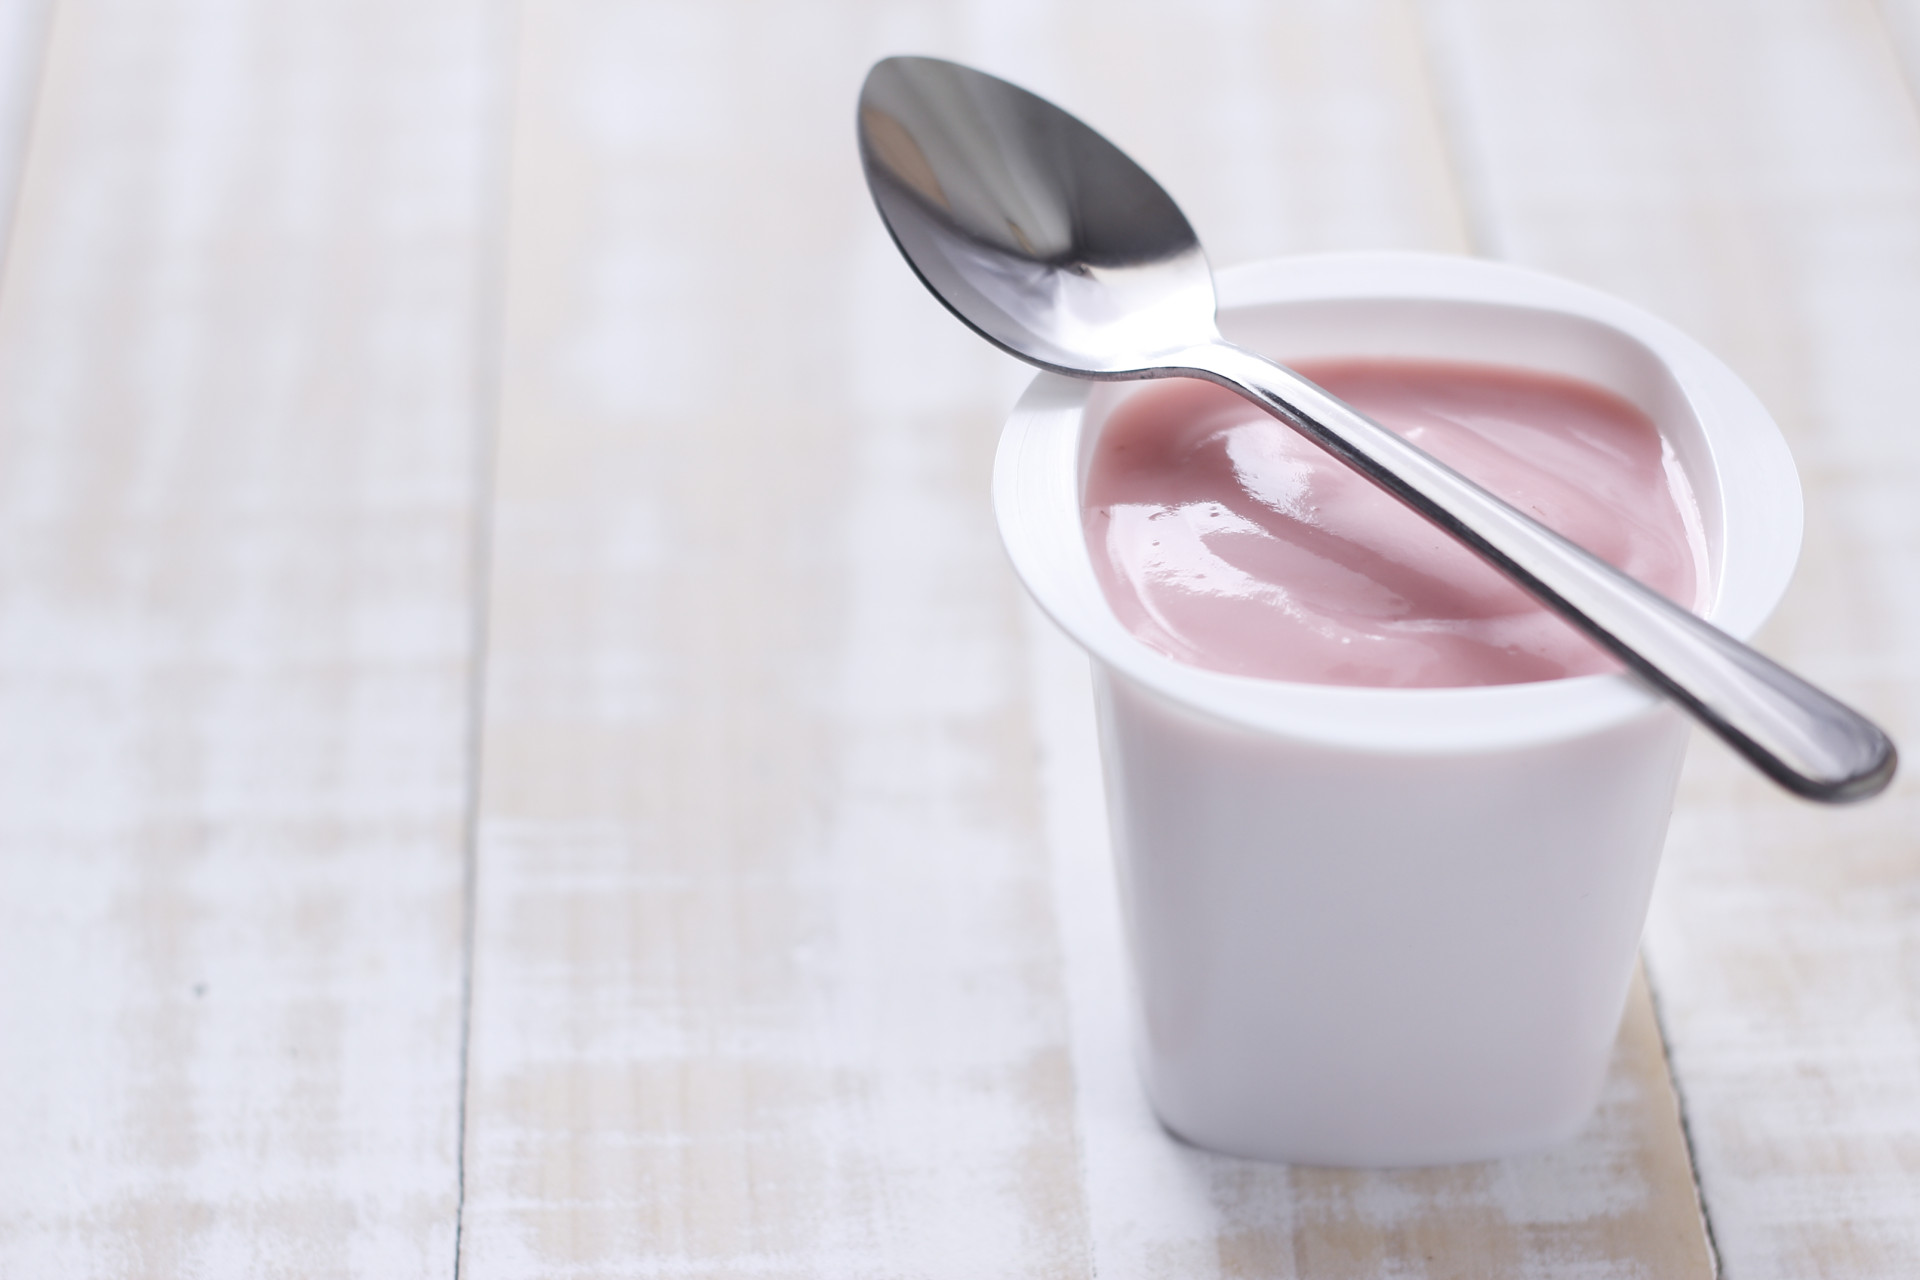 <span>Small cups of Greek yogurt make for a convenient and light snack that will leave your gut feeling happy and healthy.</span><p><a href="https://www.msn.com/en-us/community/channel/vid-7xx8mnucu55yw63we9va2gwr7uihbxwc68fxqp25x6tg4ftibpra?cvid=94631541bc0f4f89bfd59158d696ad7e">Follow us and access great exclusive content every day</a></p>